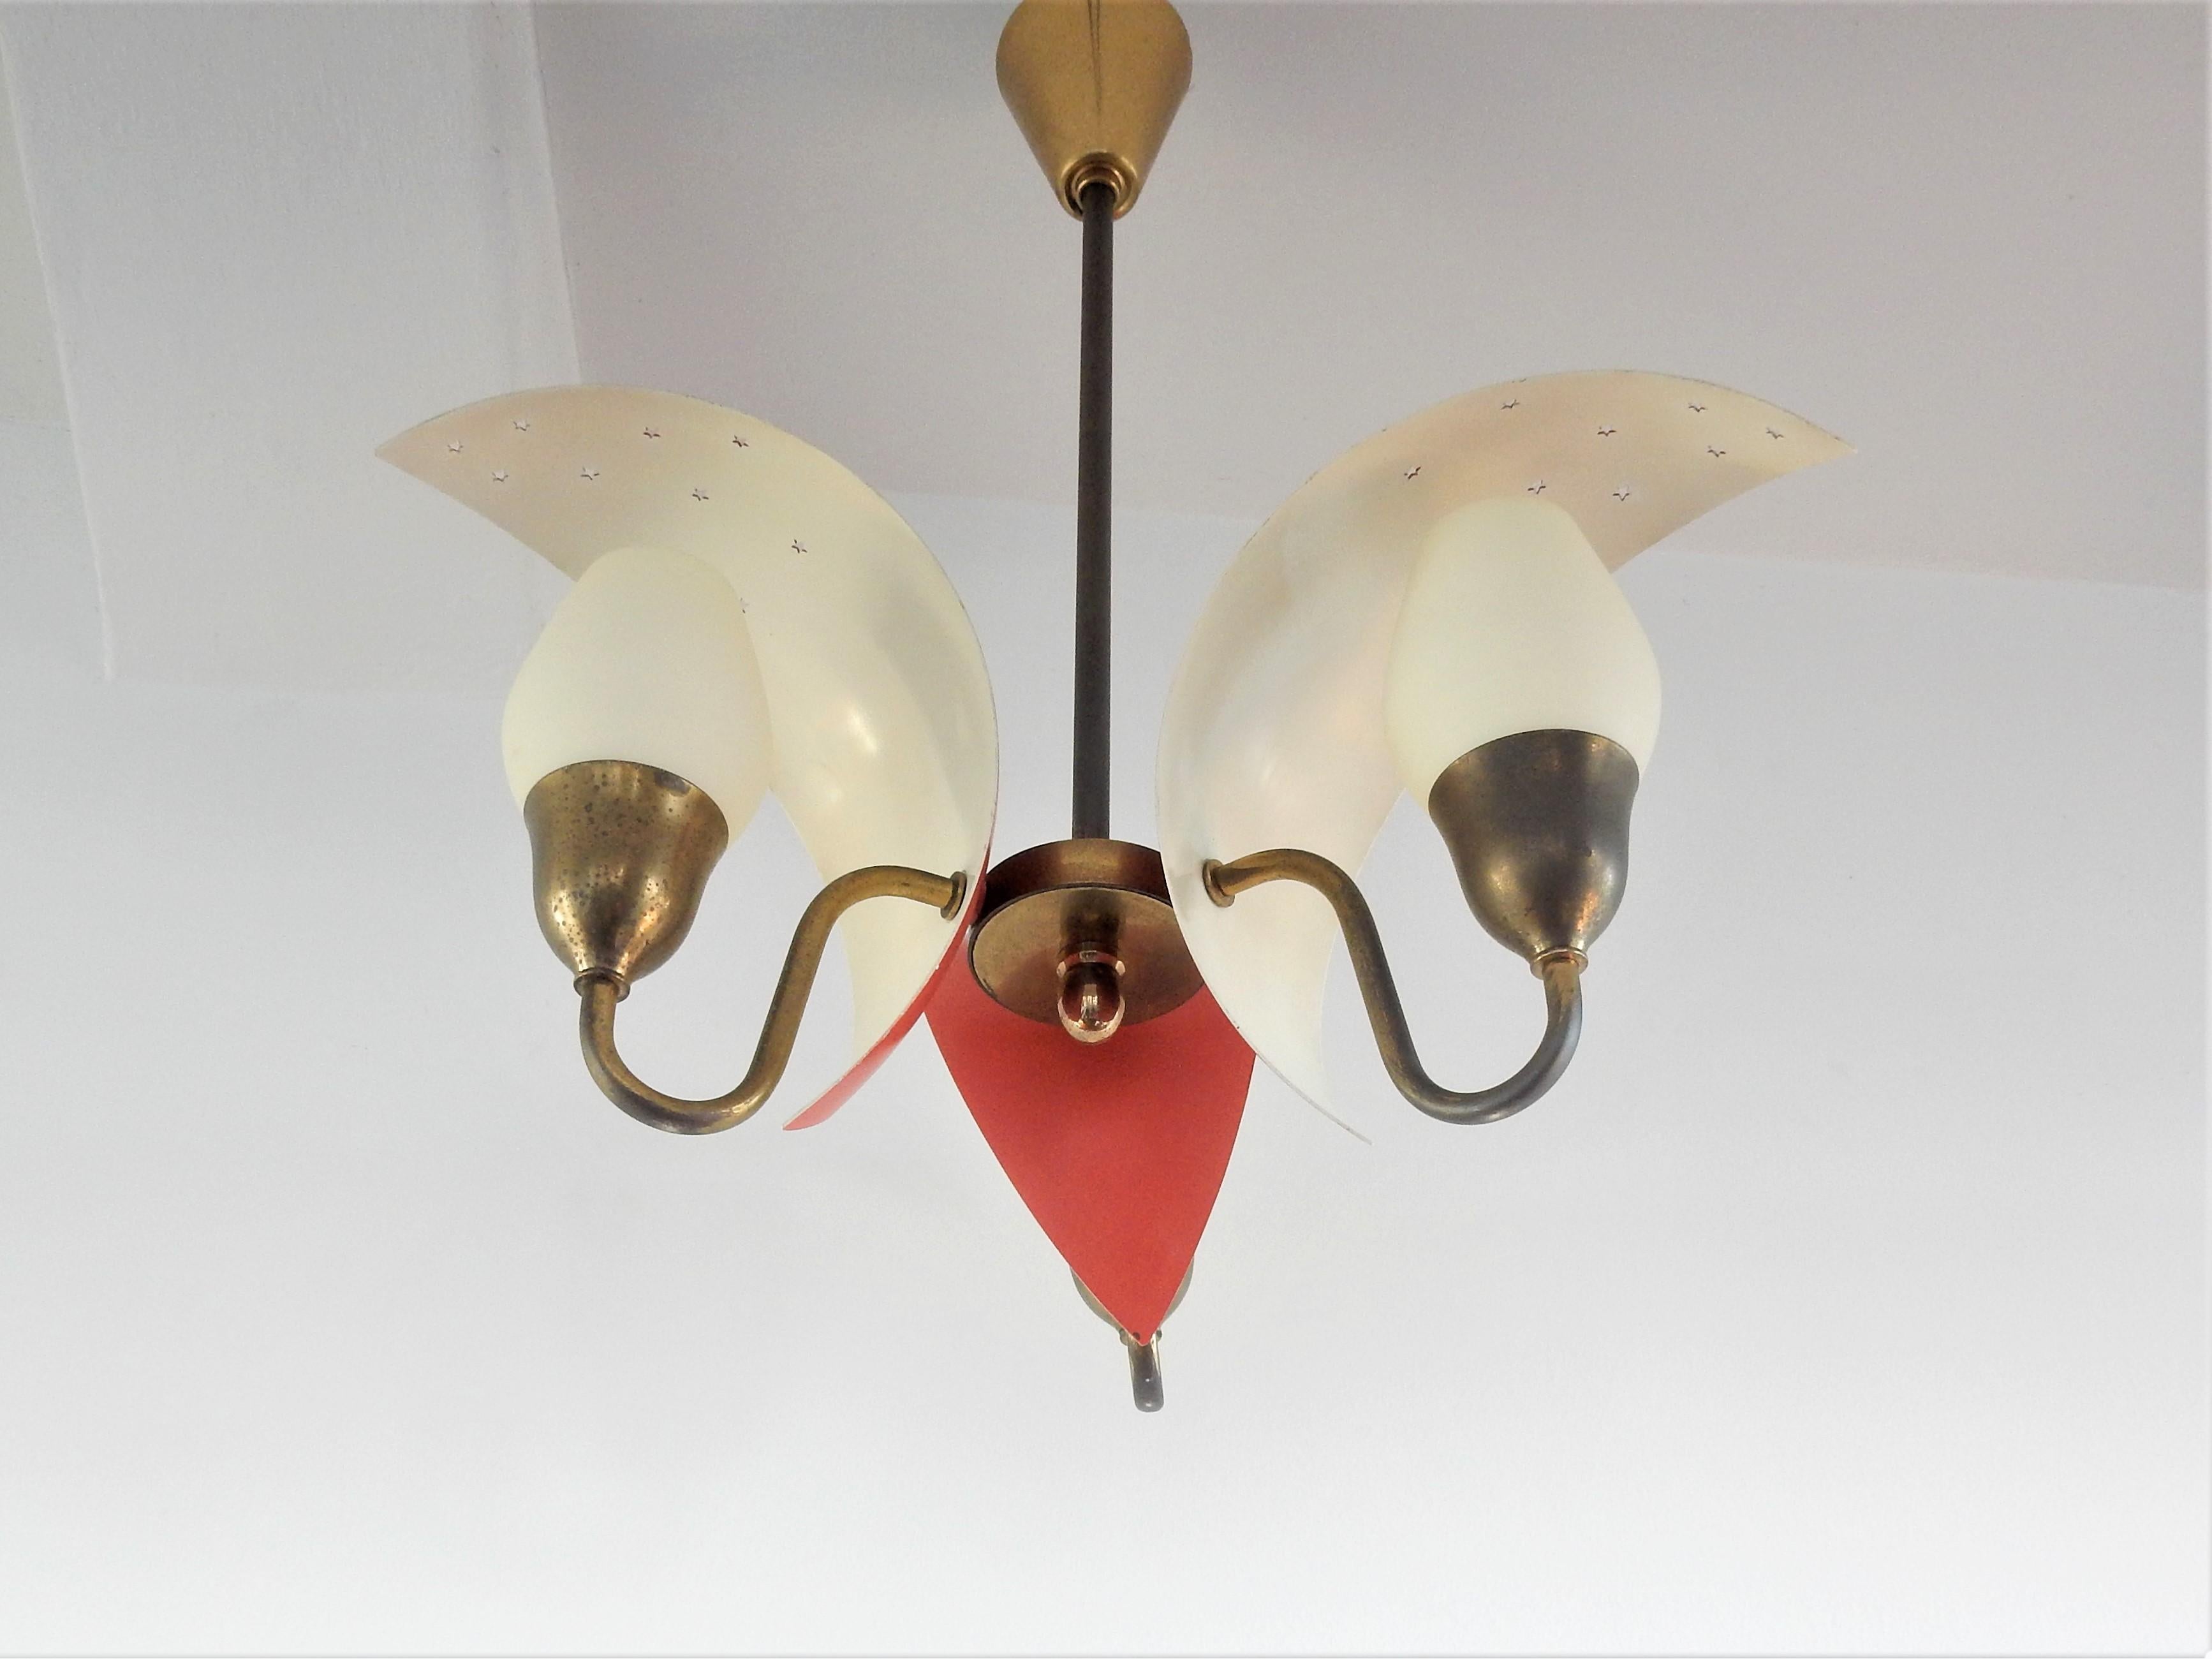 Danish Metal, Glass and Brass Chandelier by Bent Karlby for Fog & Mørup, Denmark, 1950s For Sale